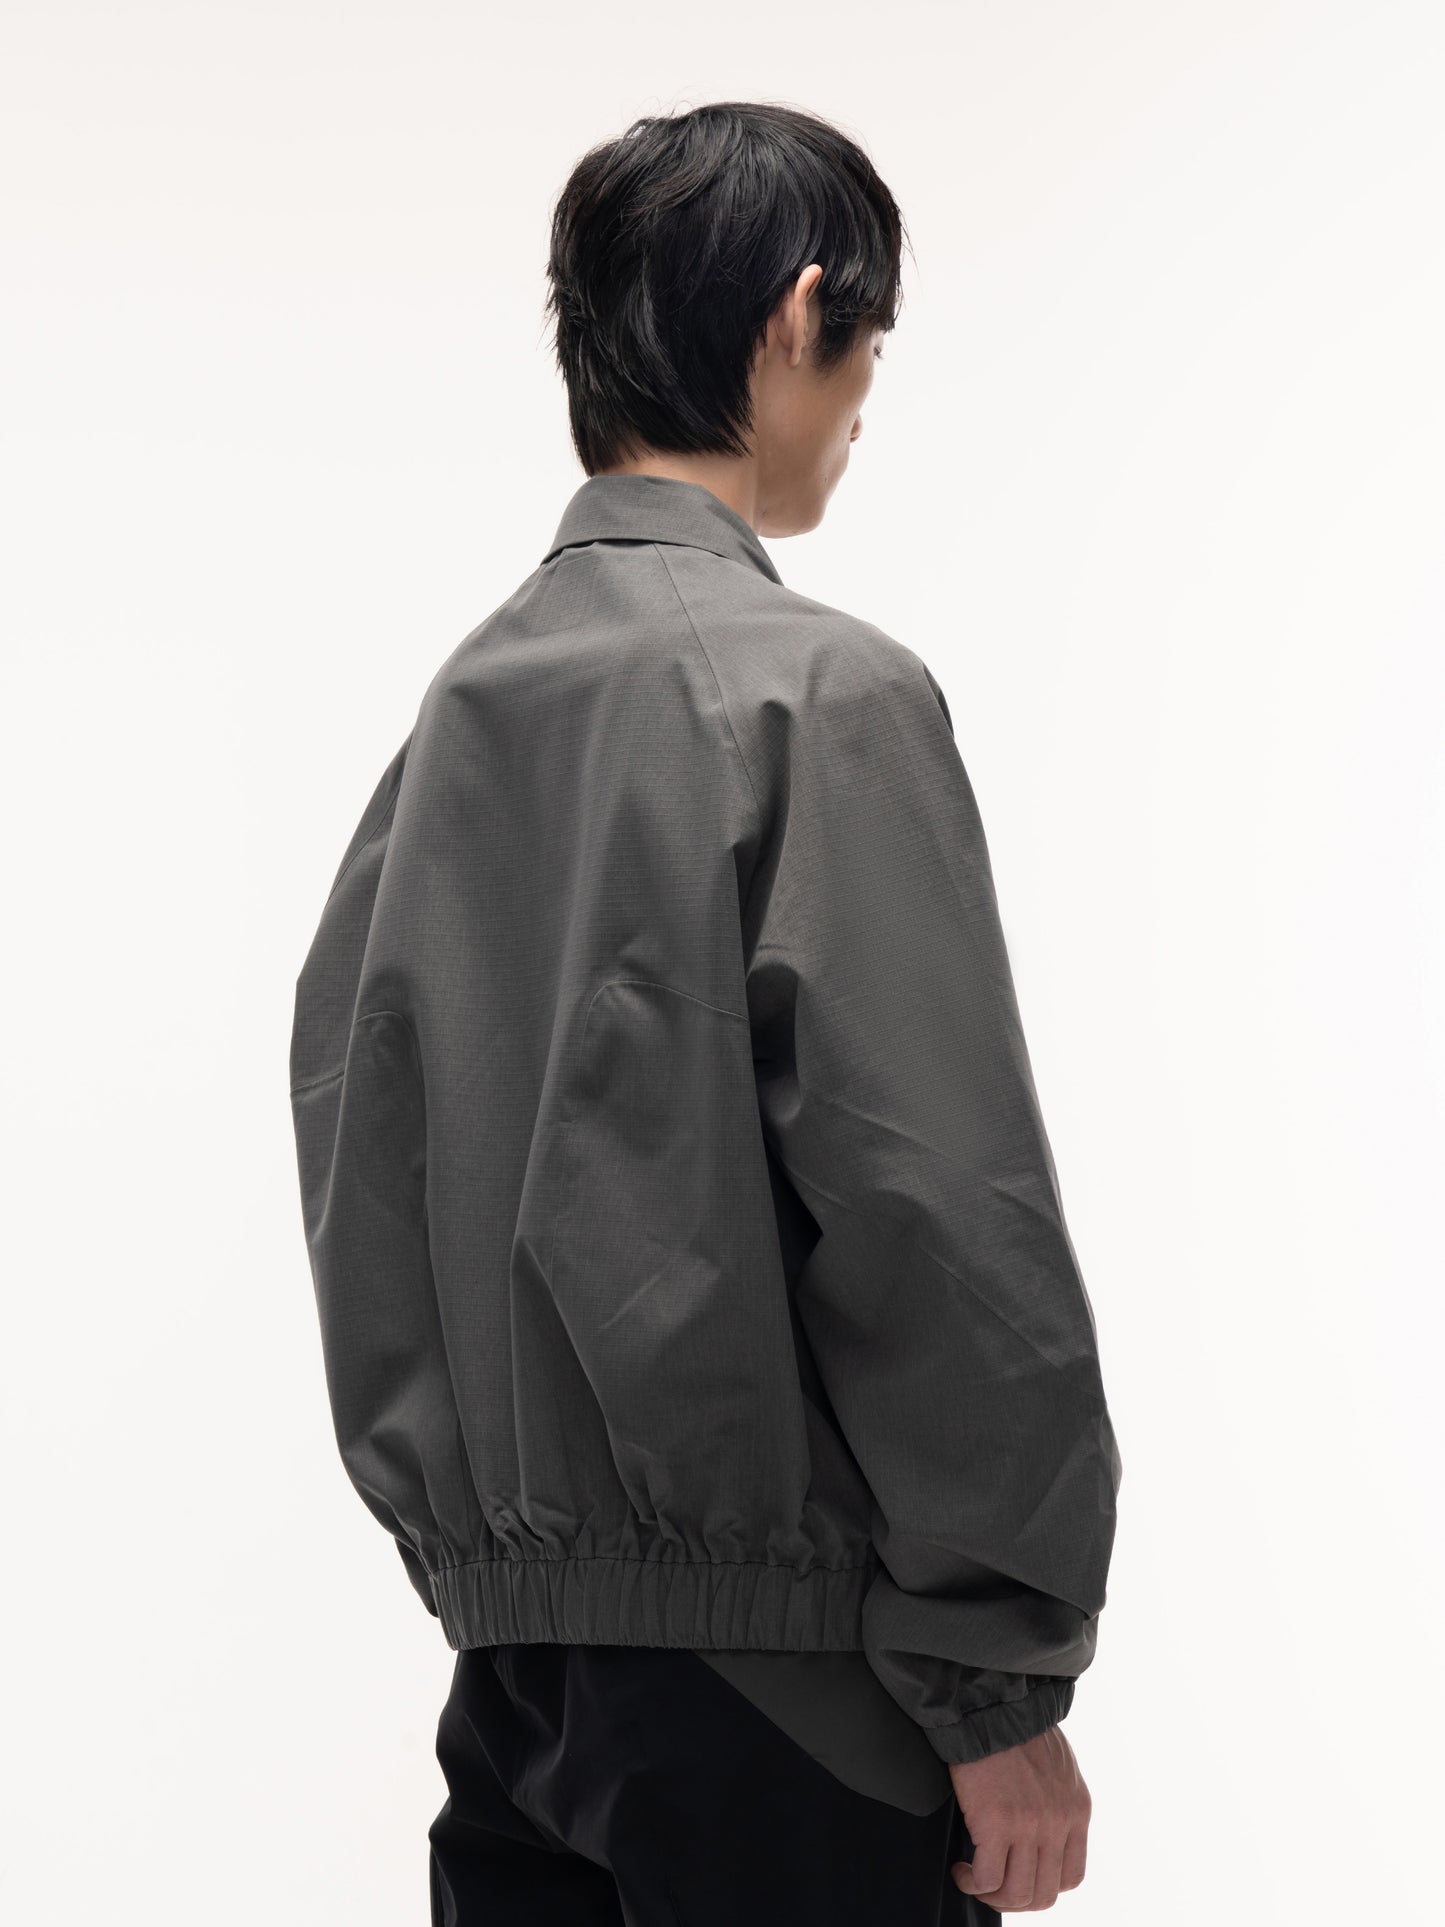 Magnetic Attraction Jacket